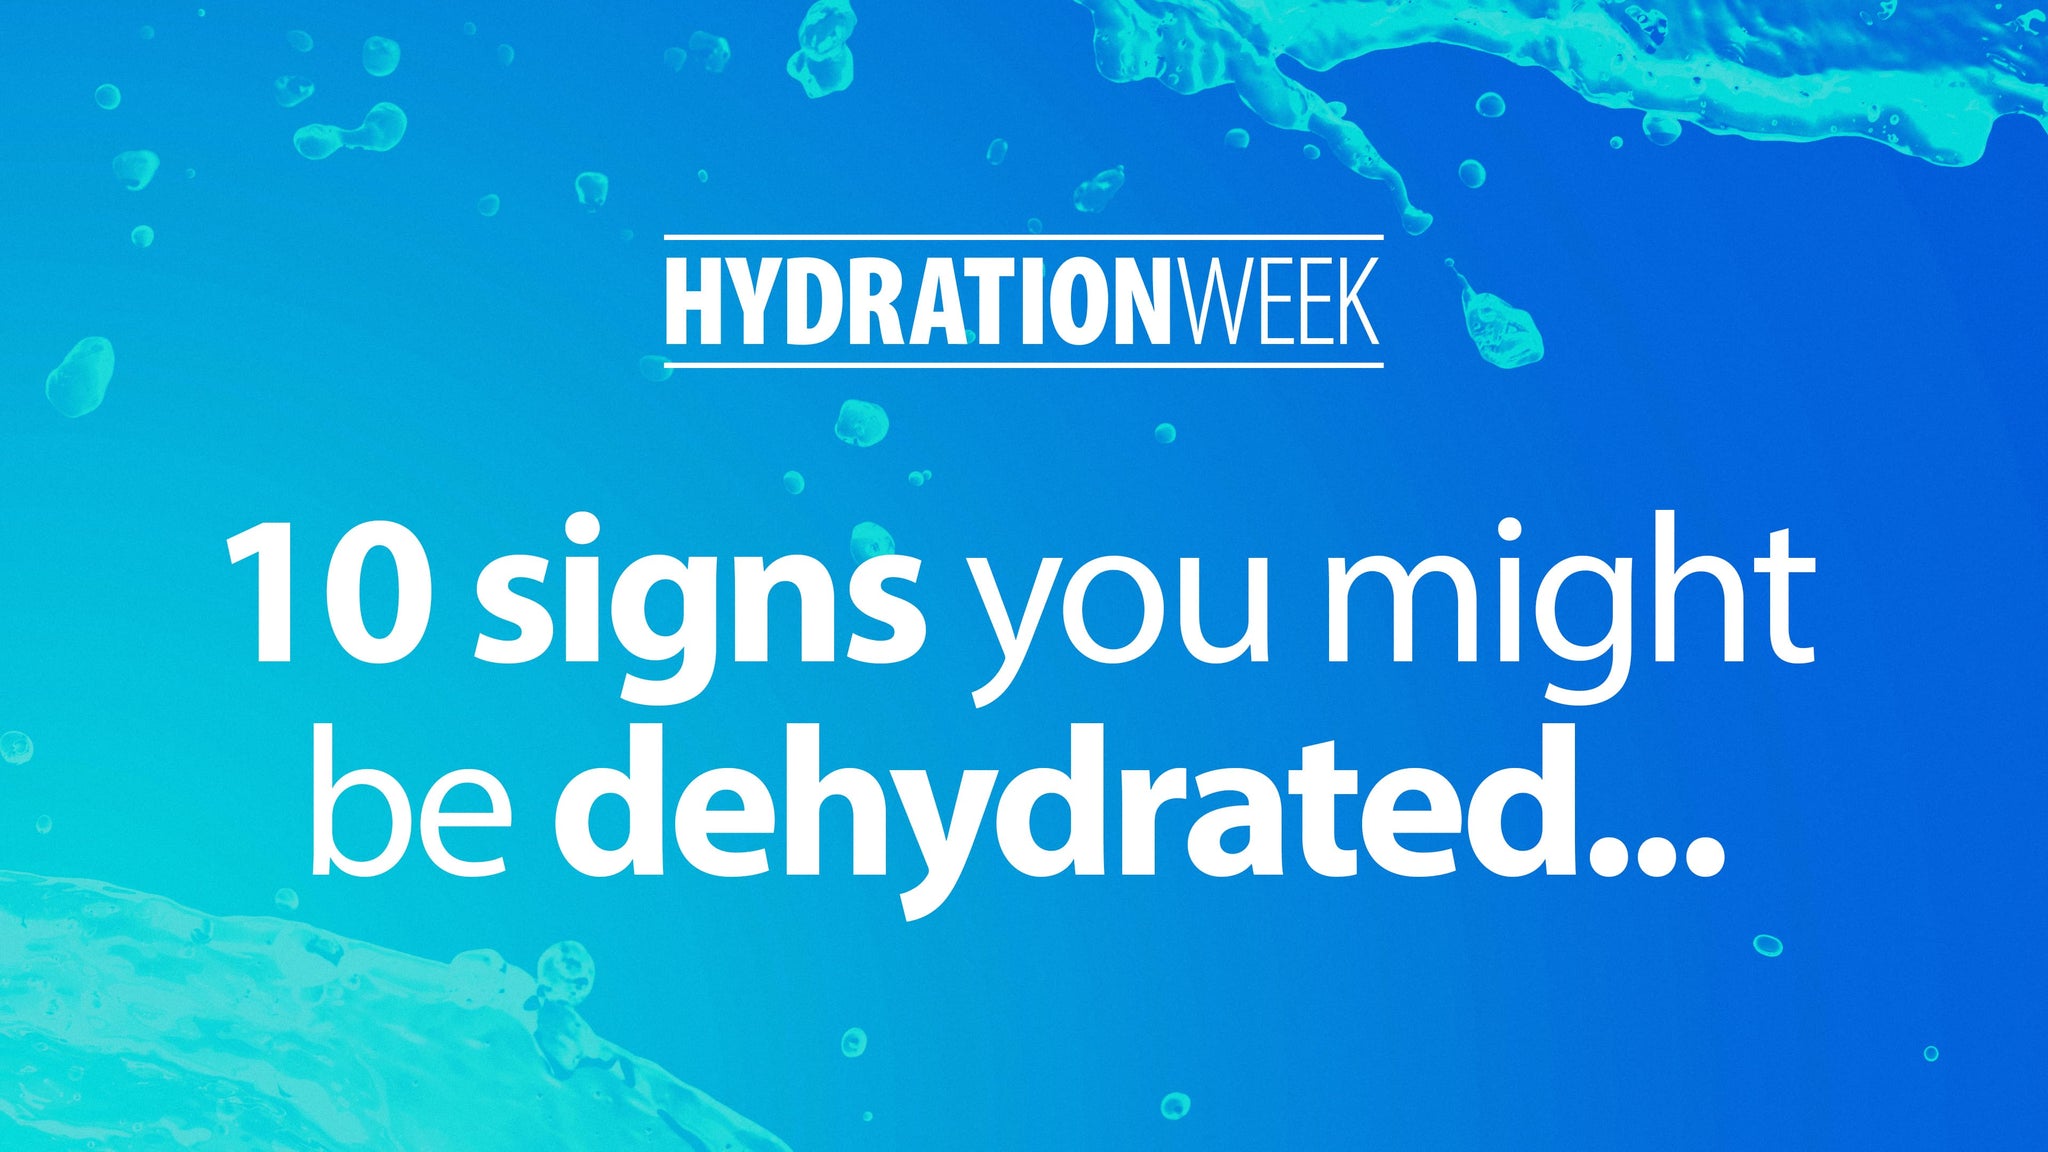 10 Signs You Might be Dehydrated